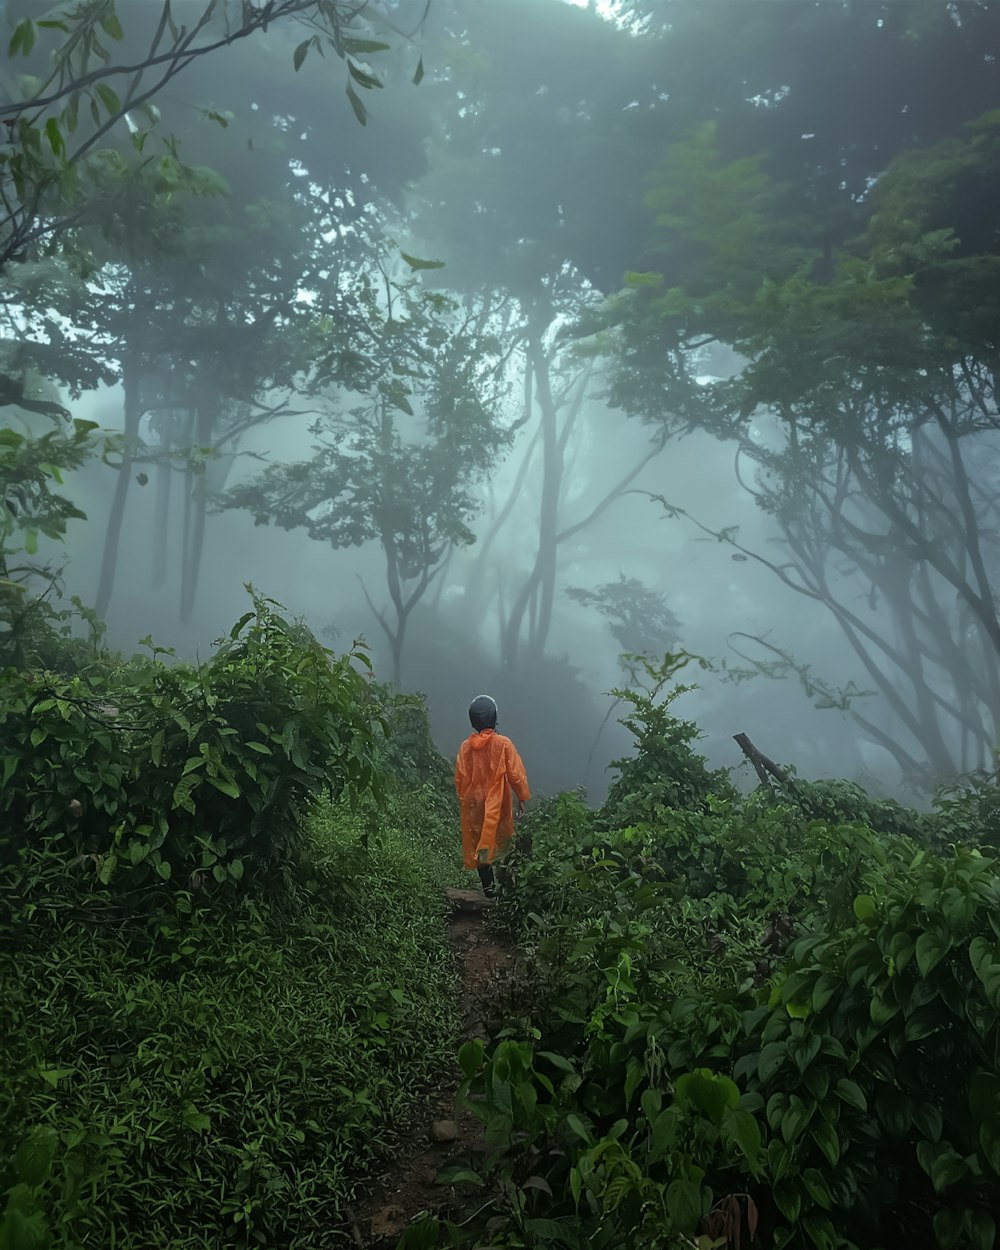 a person in an orange jacket walking through a forest